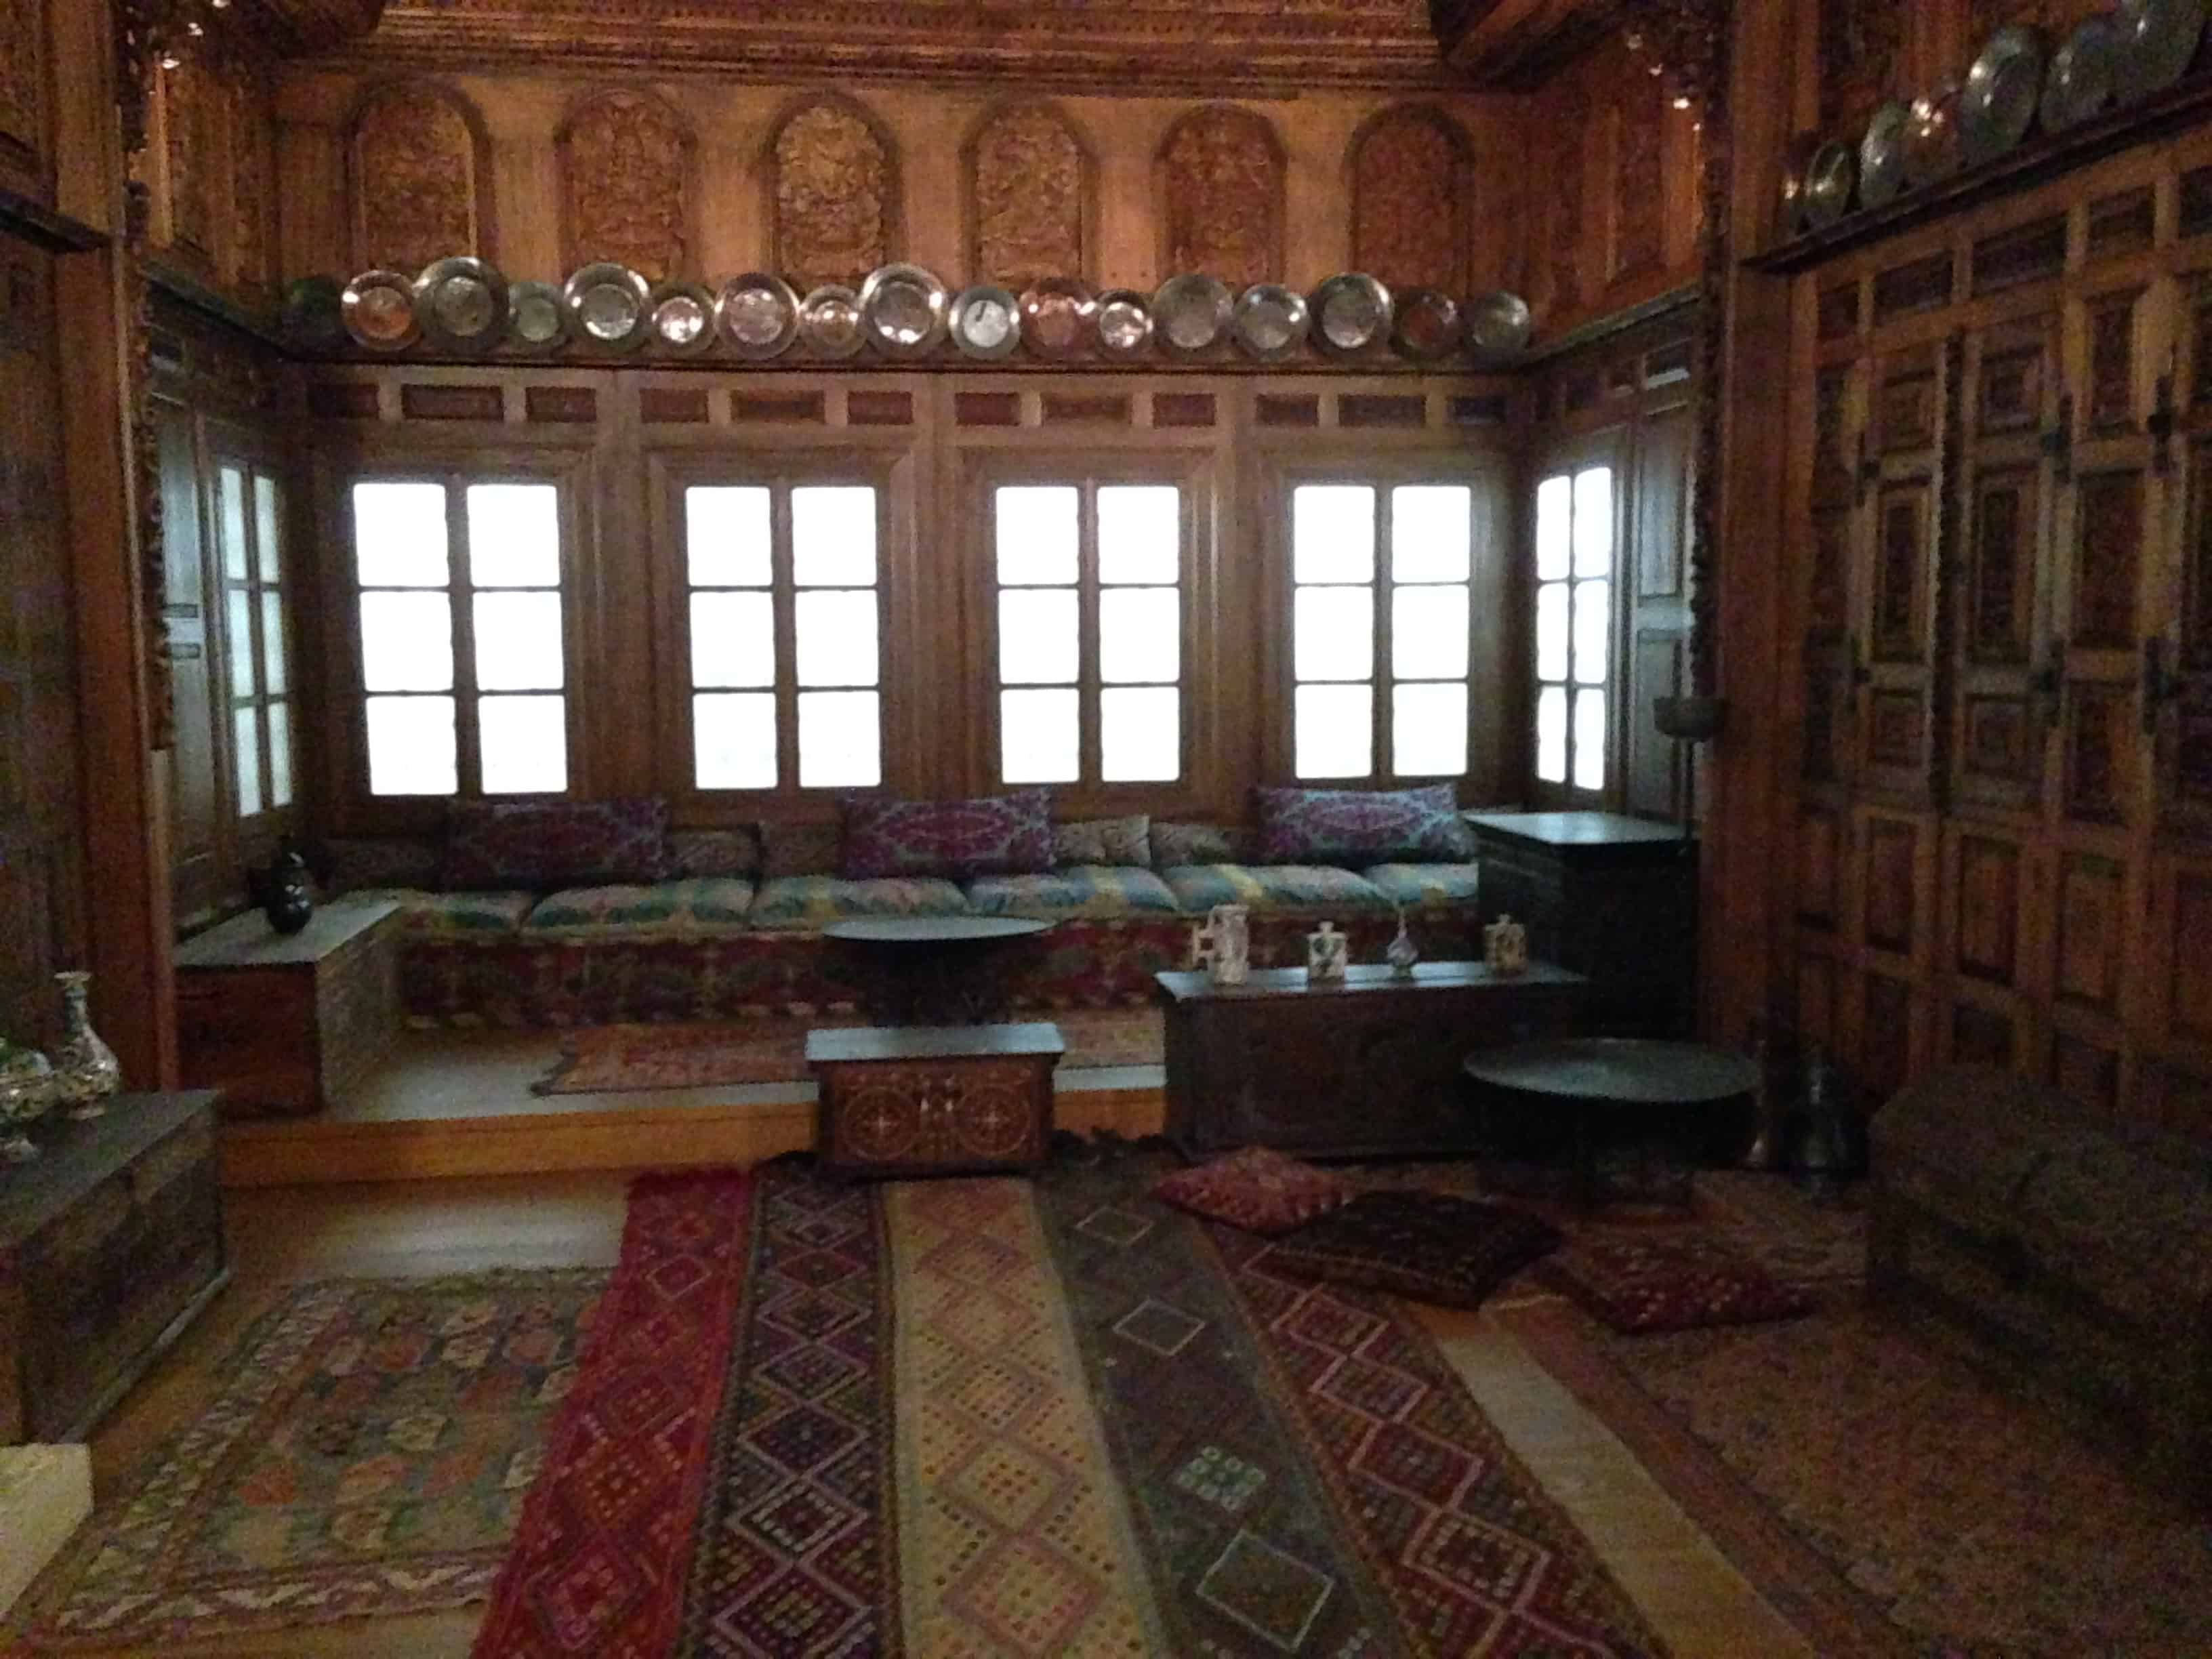 Room from a mansion in Kozani at the Benaki Museum of Greek Culture in Athens, Greece